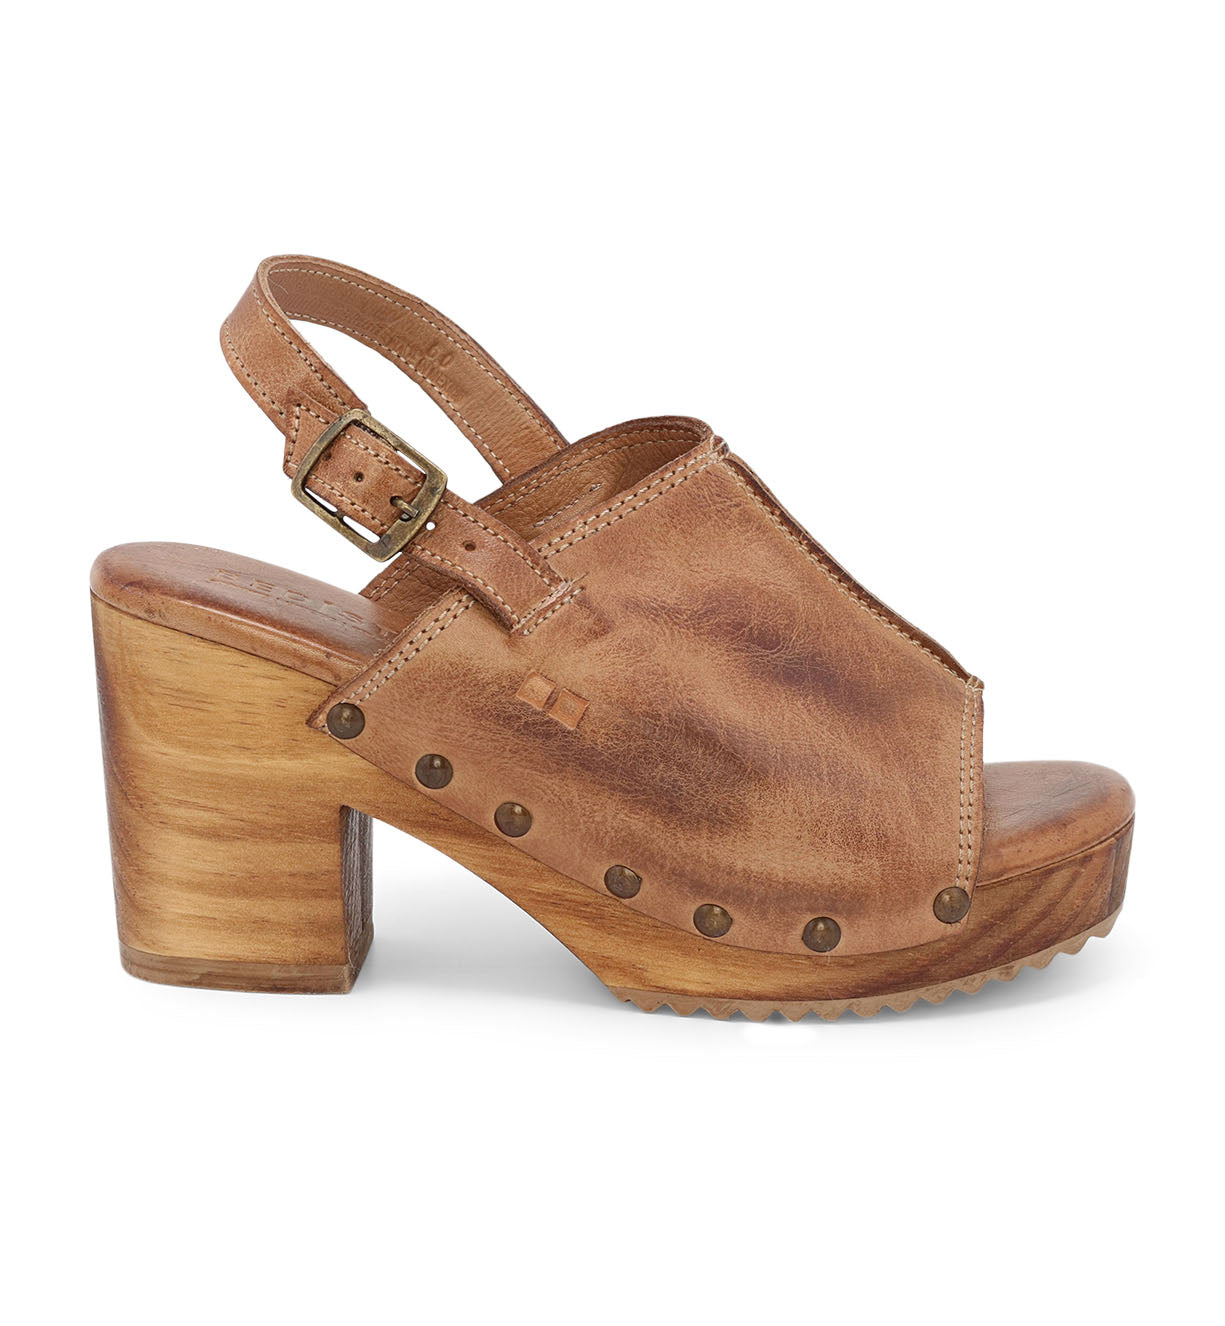 A Marie leather sandal with wooden heel by Bed Stu.